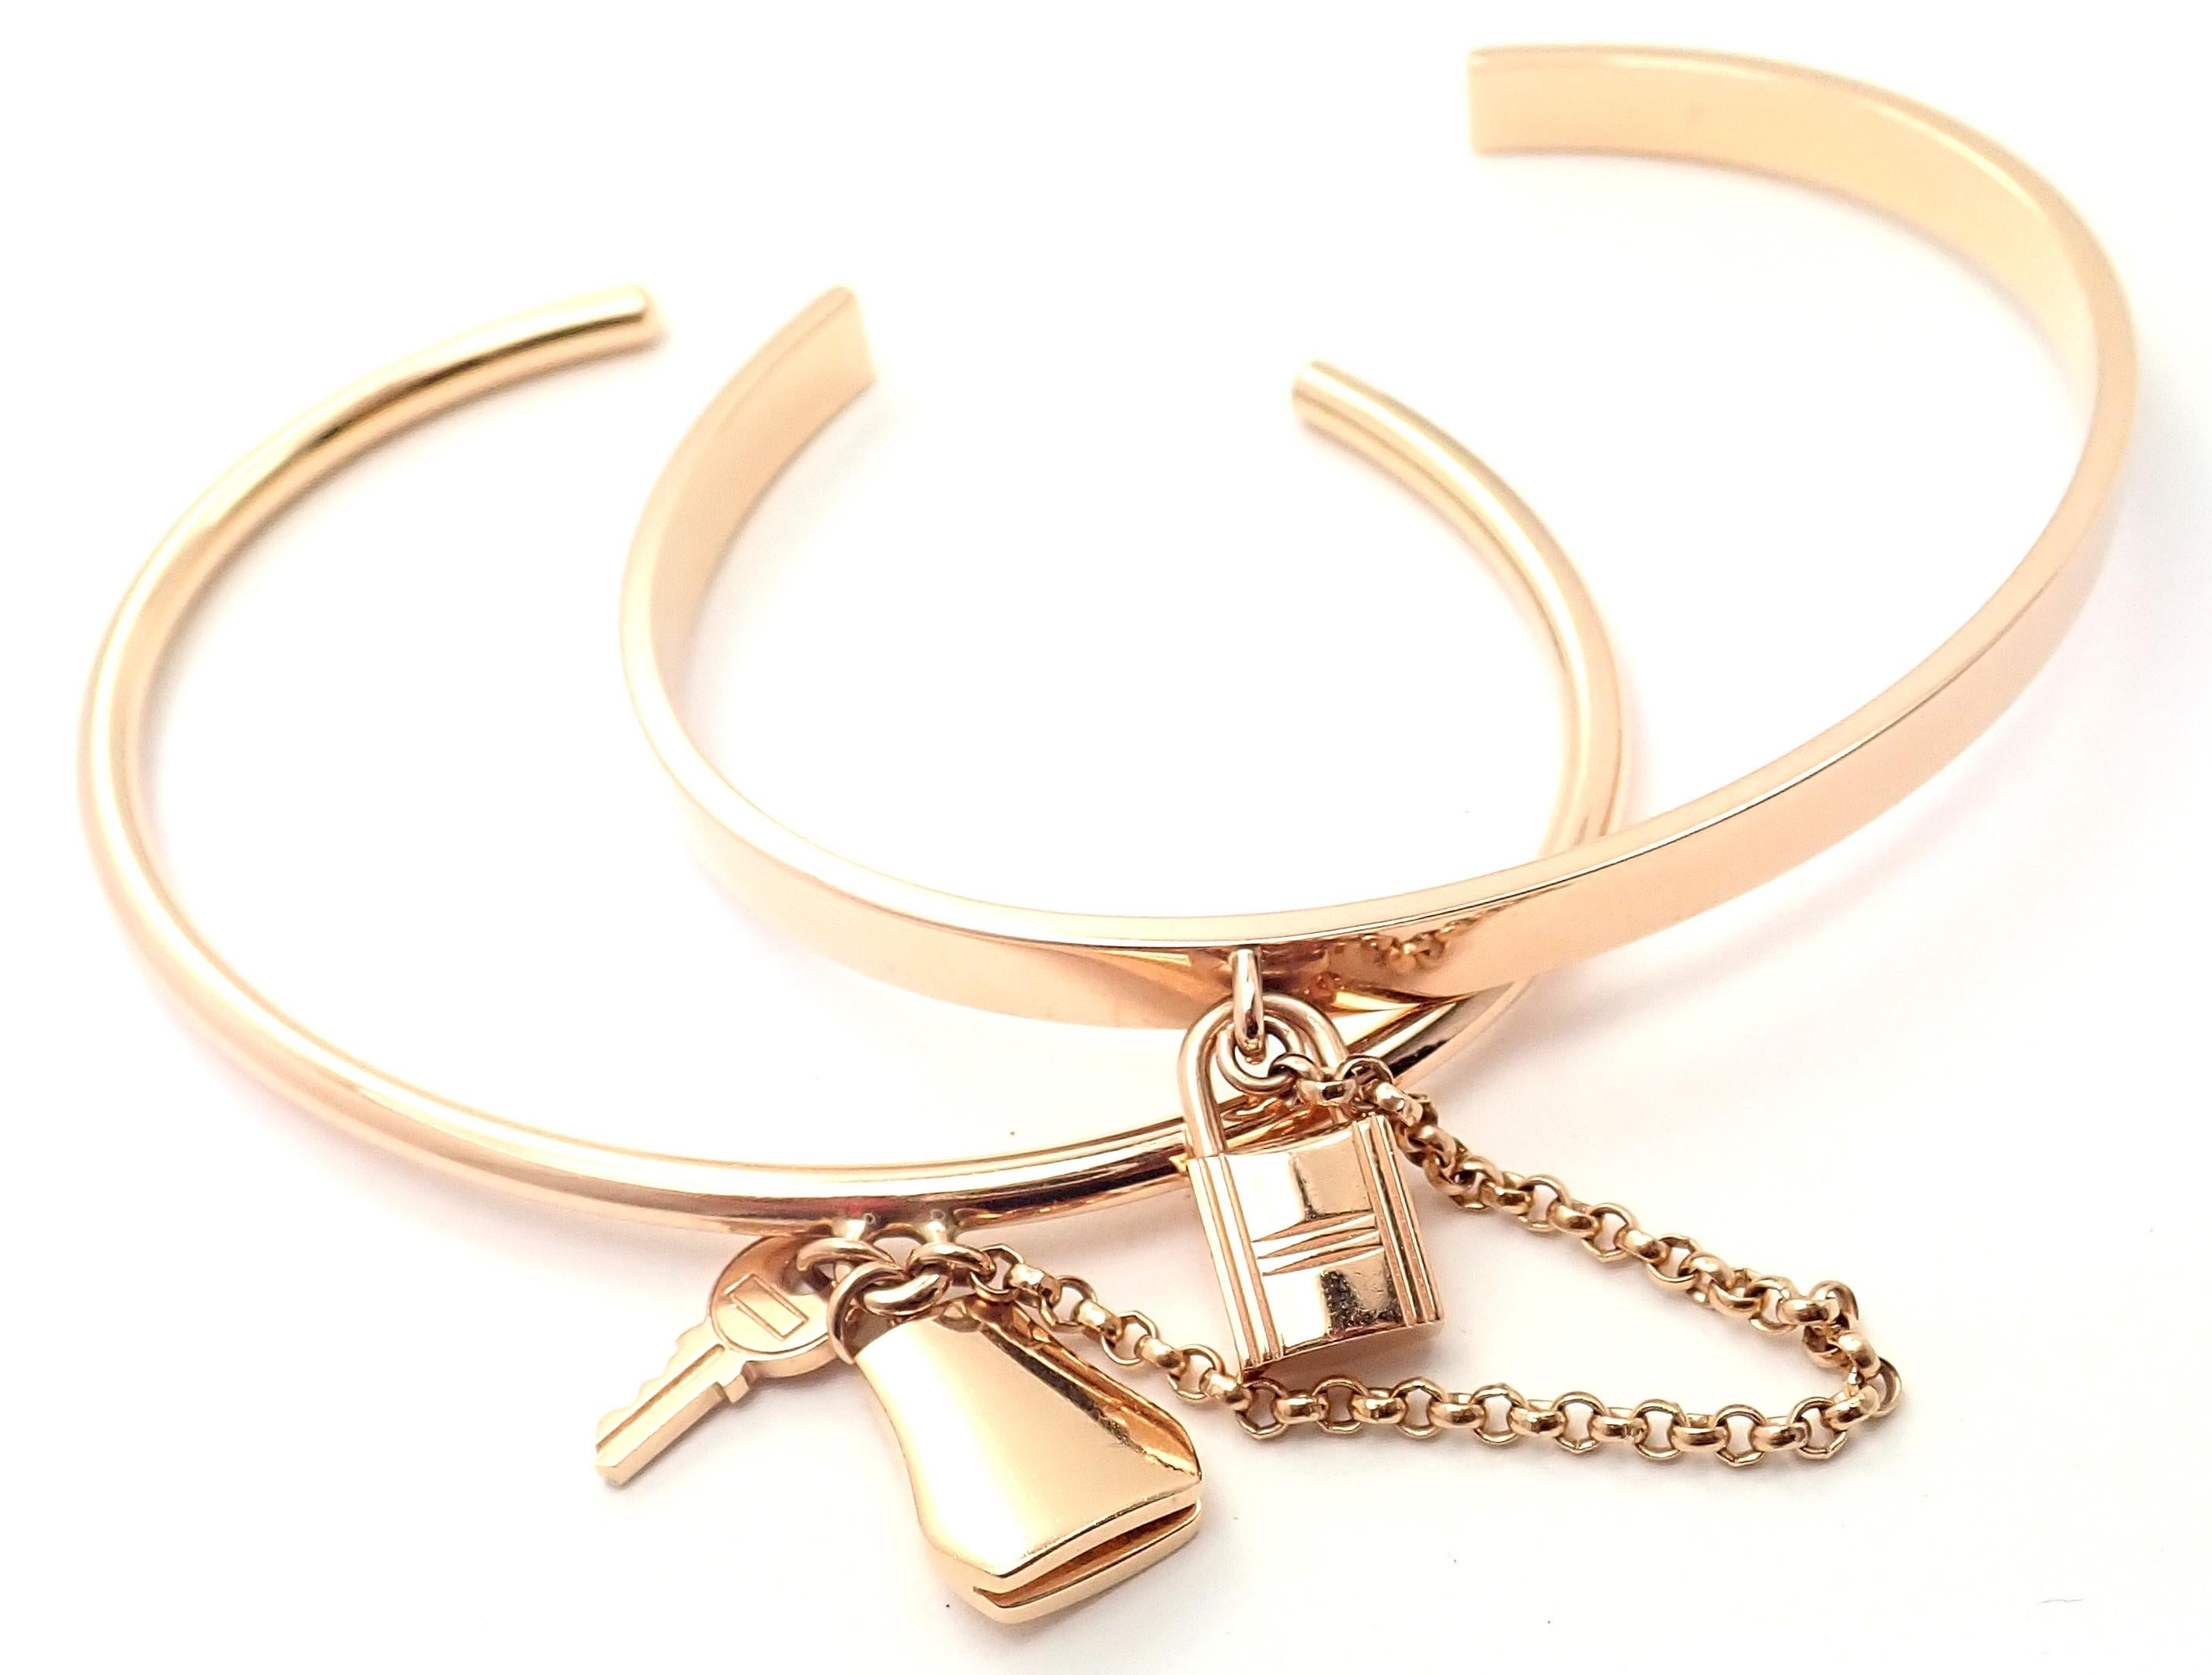 18k Yellow Gold Kelly Clochette Double Cuff Bangle Bracelet by Hermes.
Details:
Weight: 30.3 grams
Length: 6